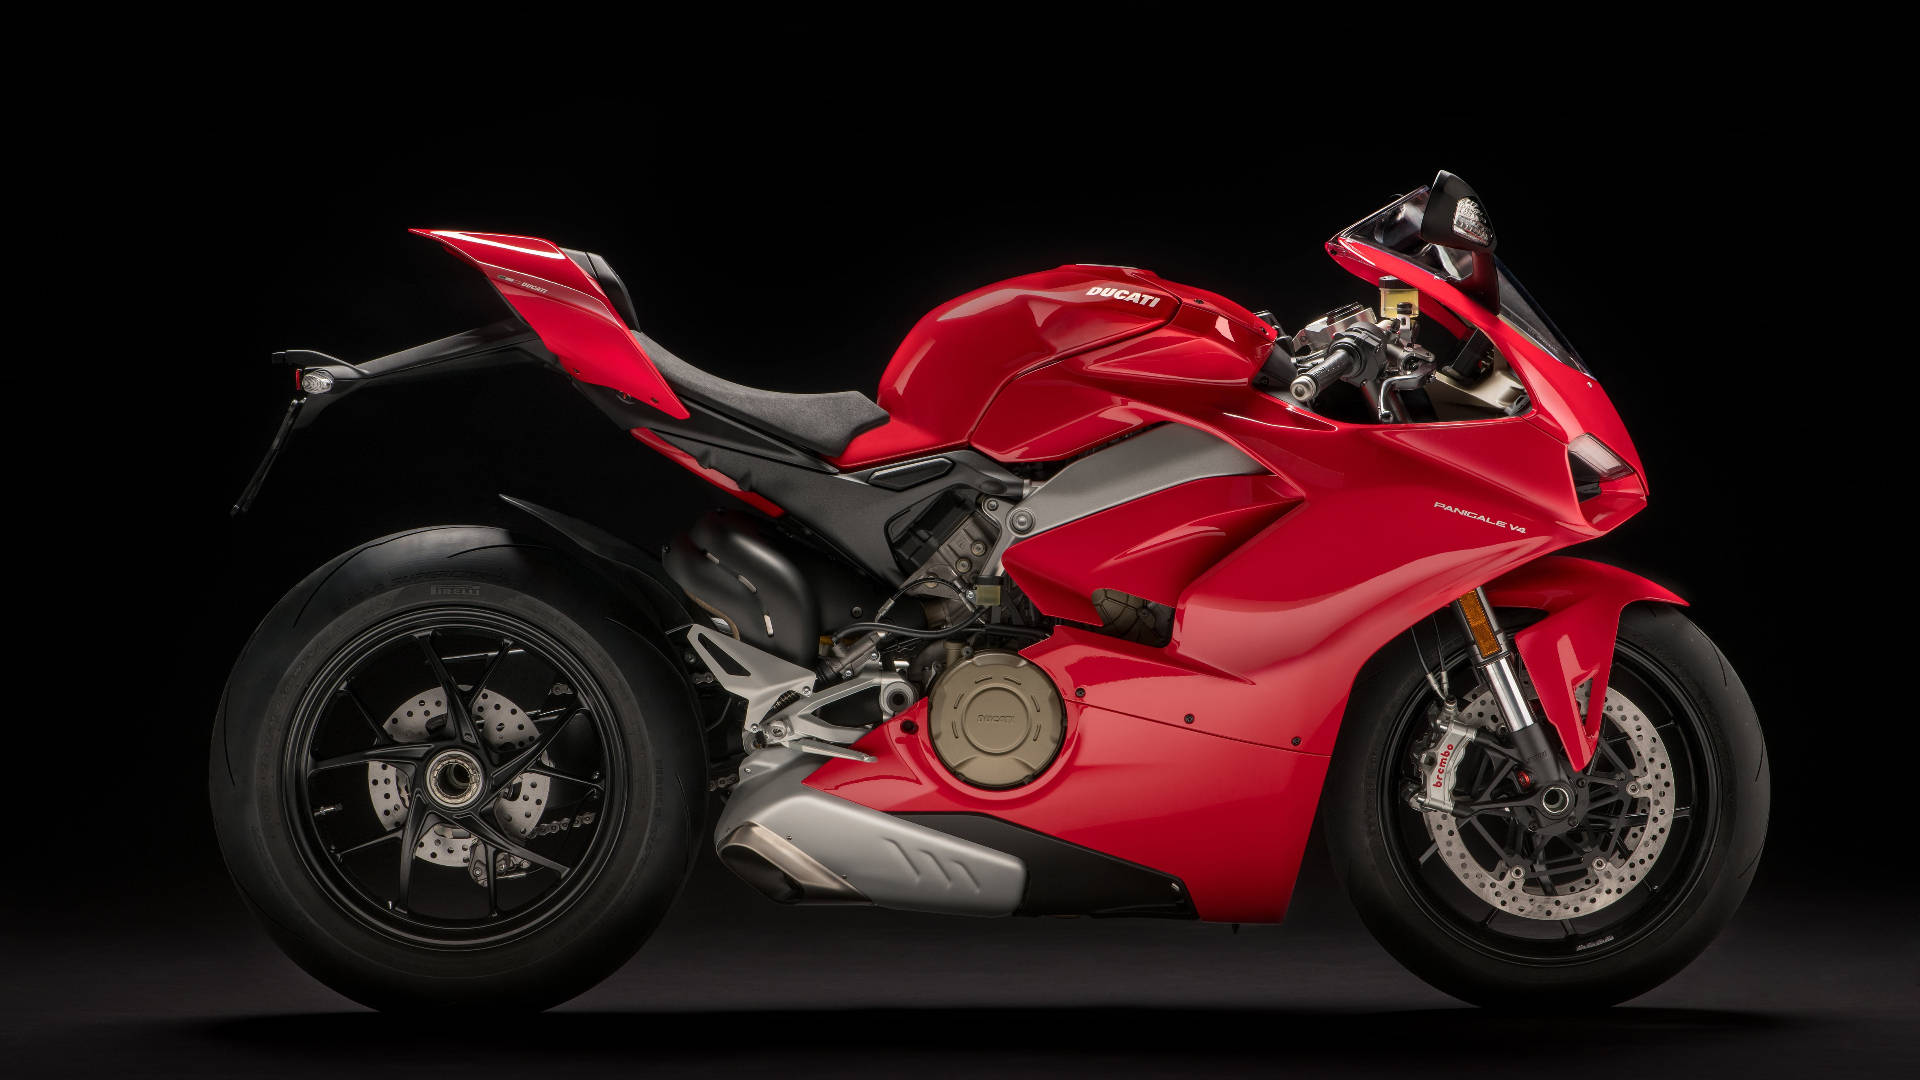 Image Ducati Panigale V4 R - Magnificent Detail Background